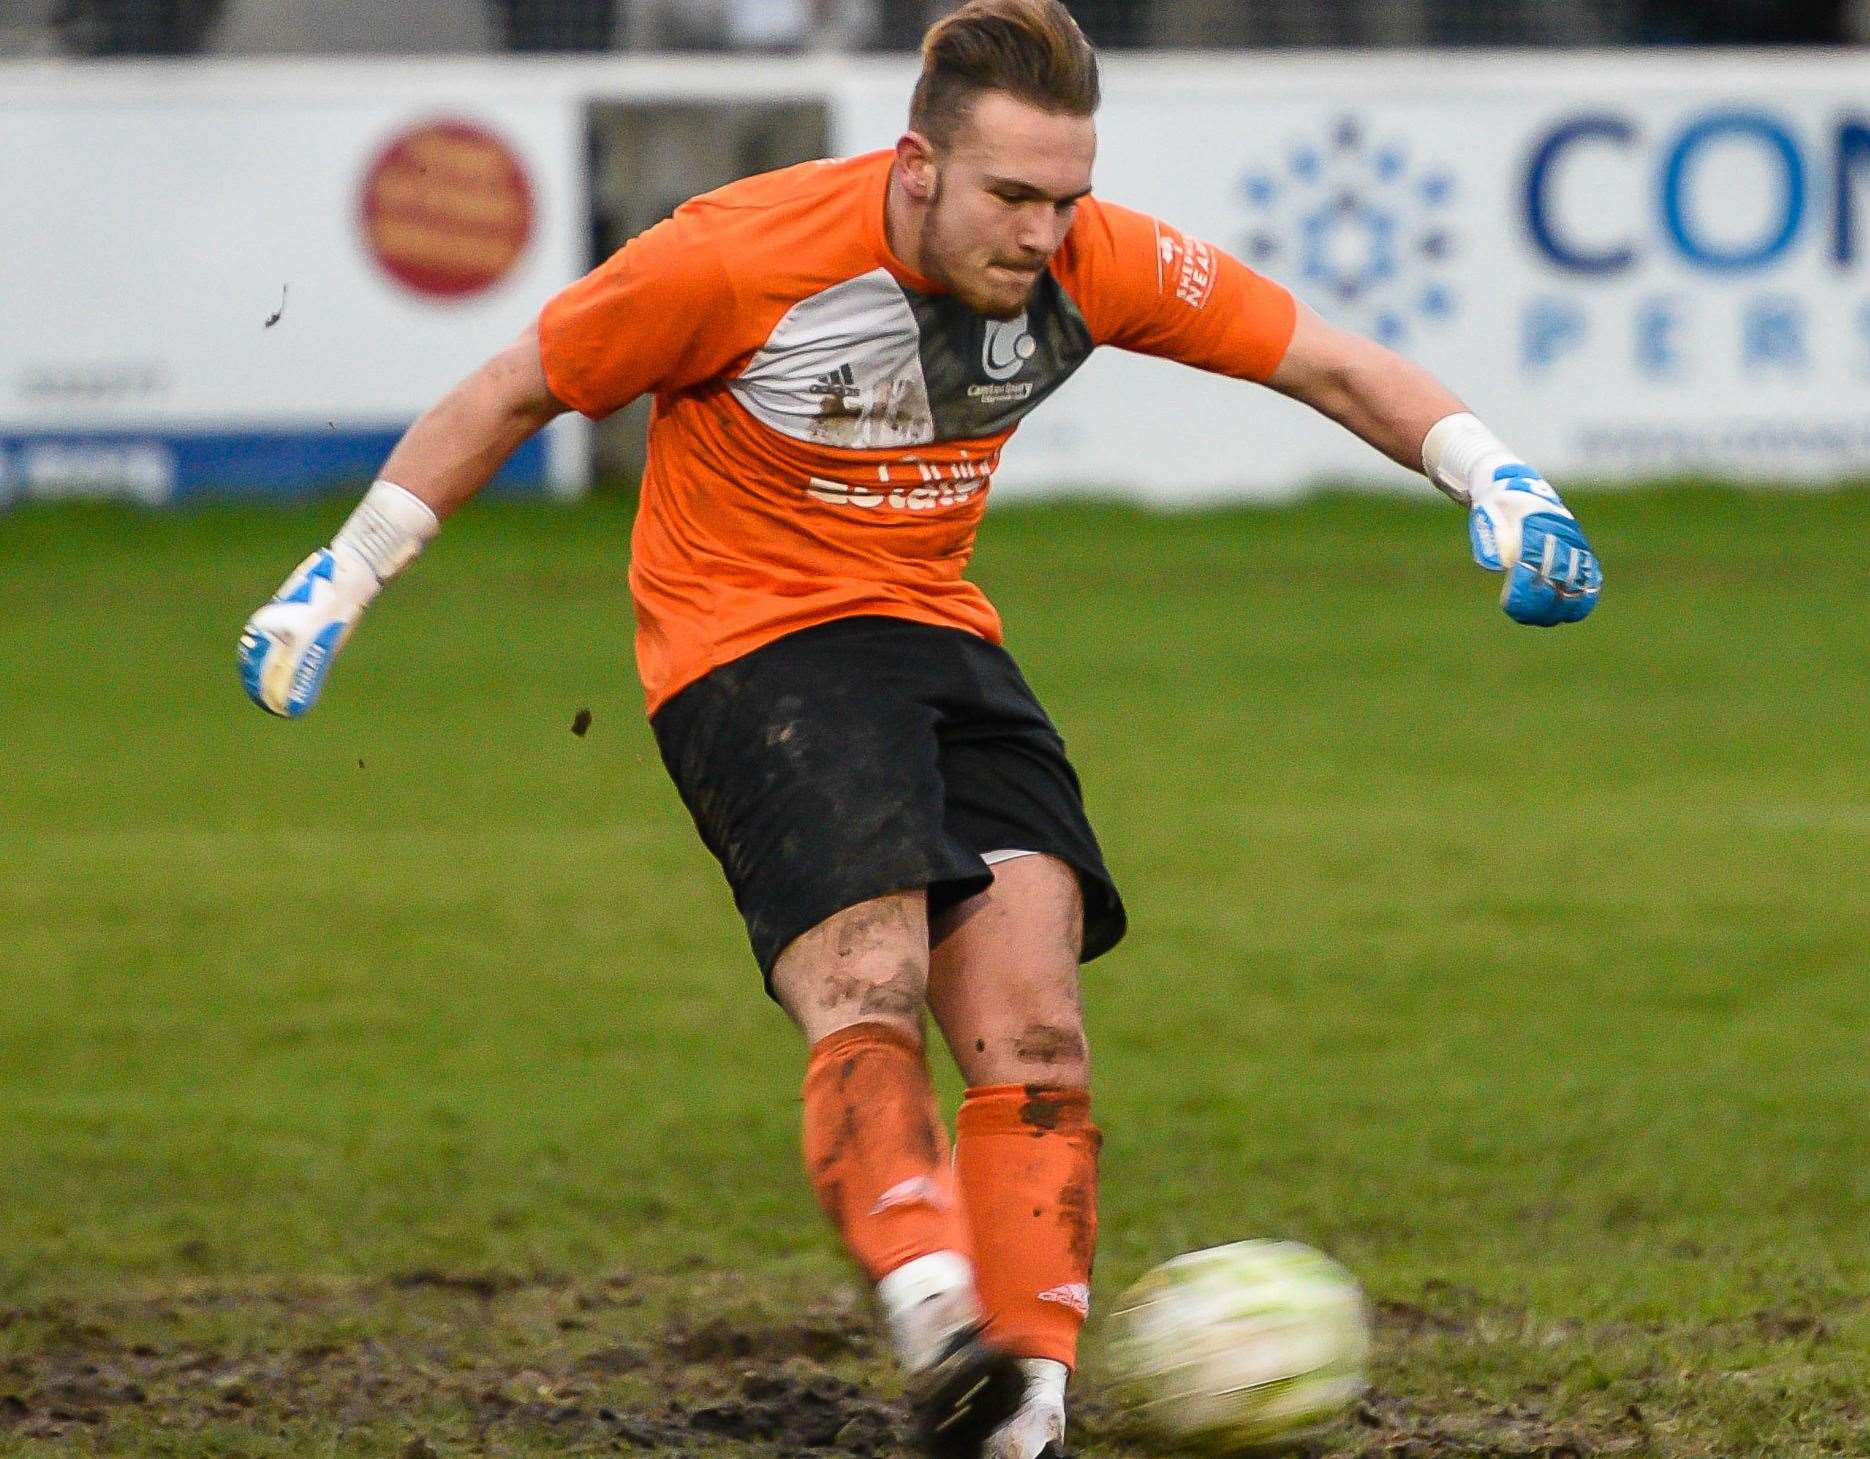 Canterbury goalkeeper Harry Earls clears. Picture: Alan Langley